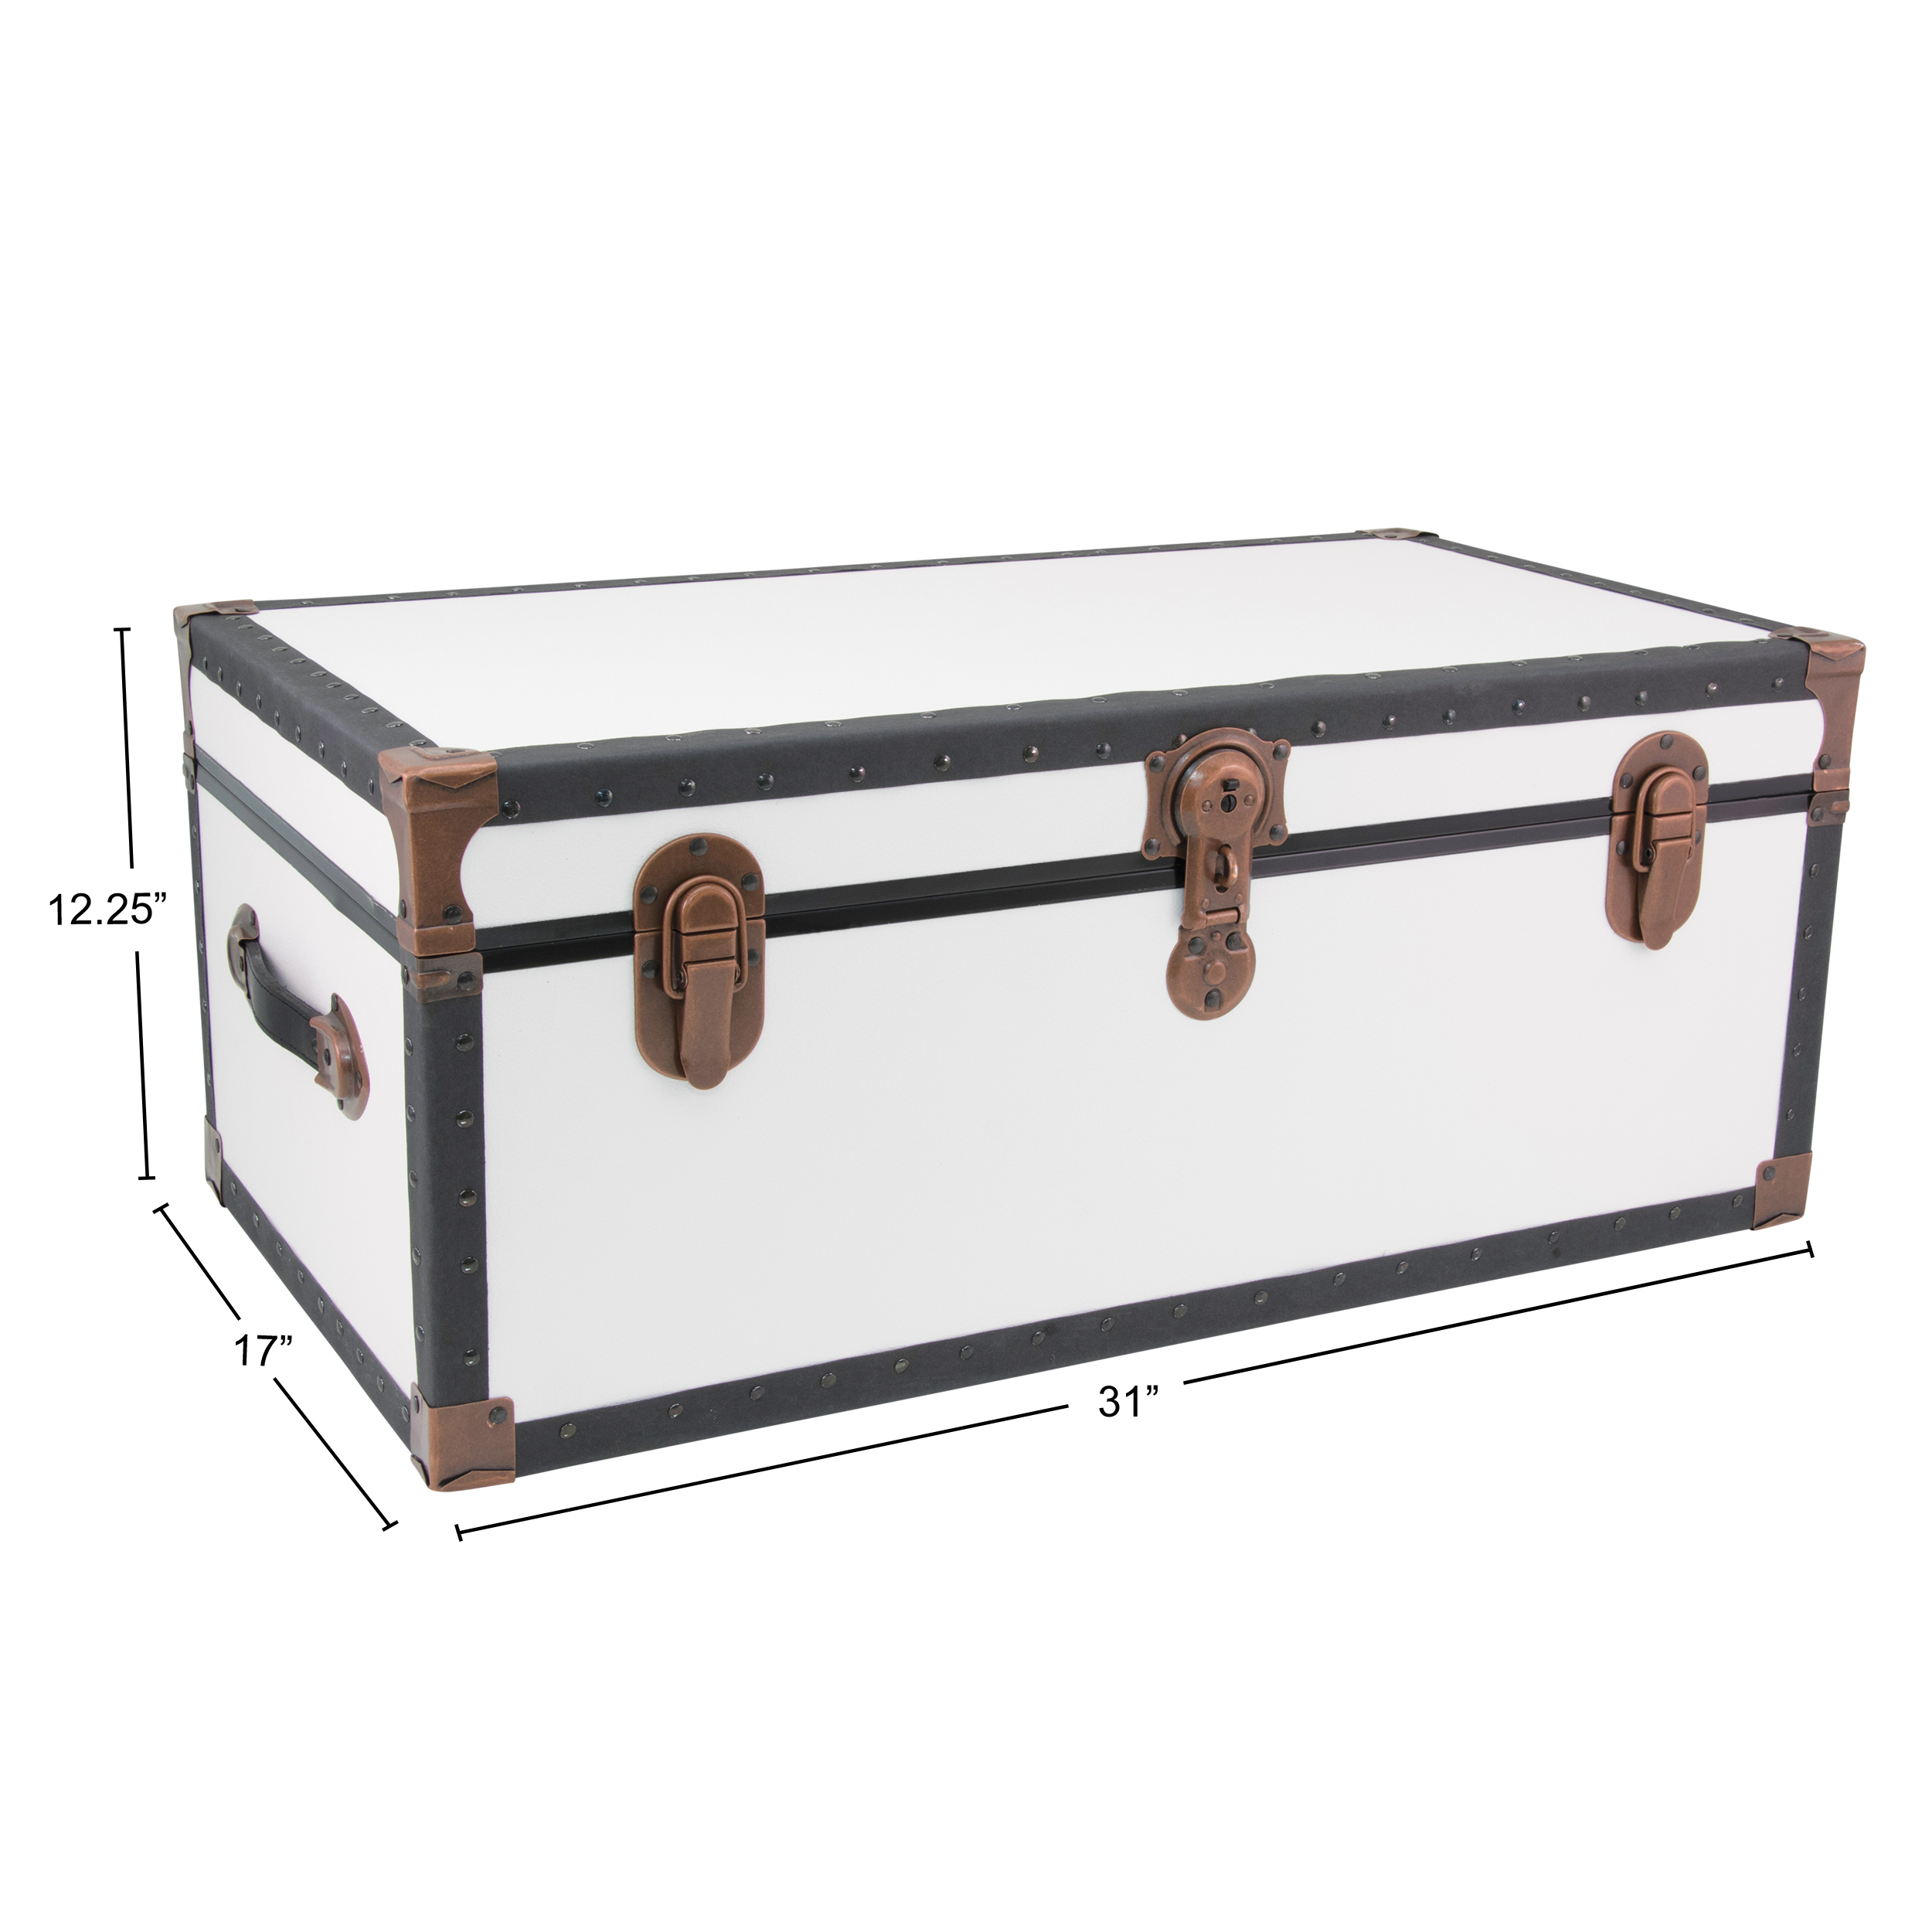 Seward Trunks 25 Gallon Wood, Plastic and Metal Trunk, White - image 3 of 8